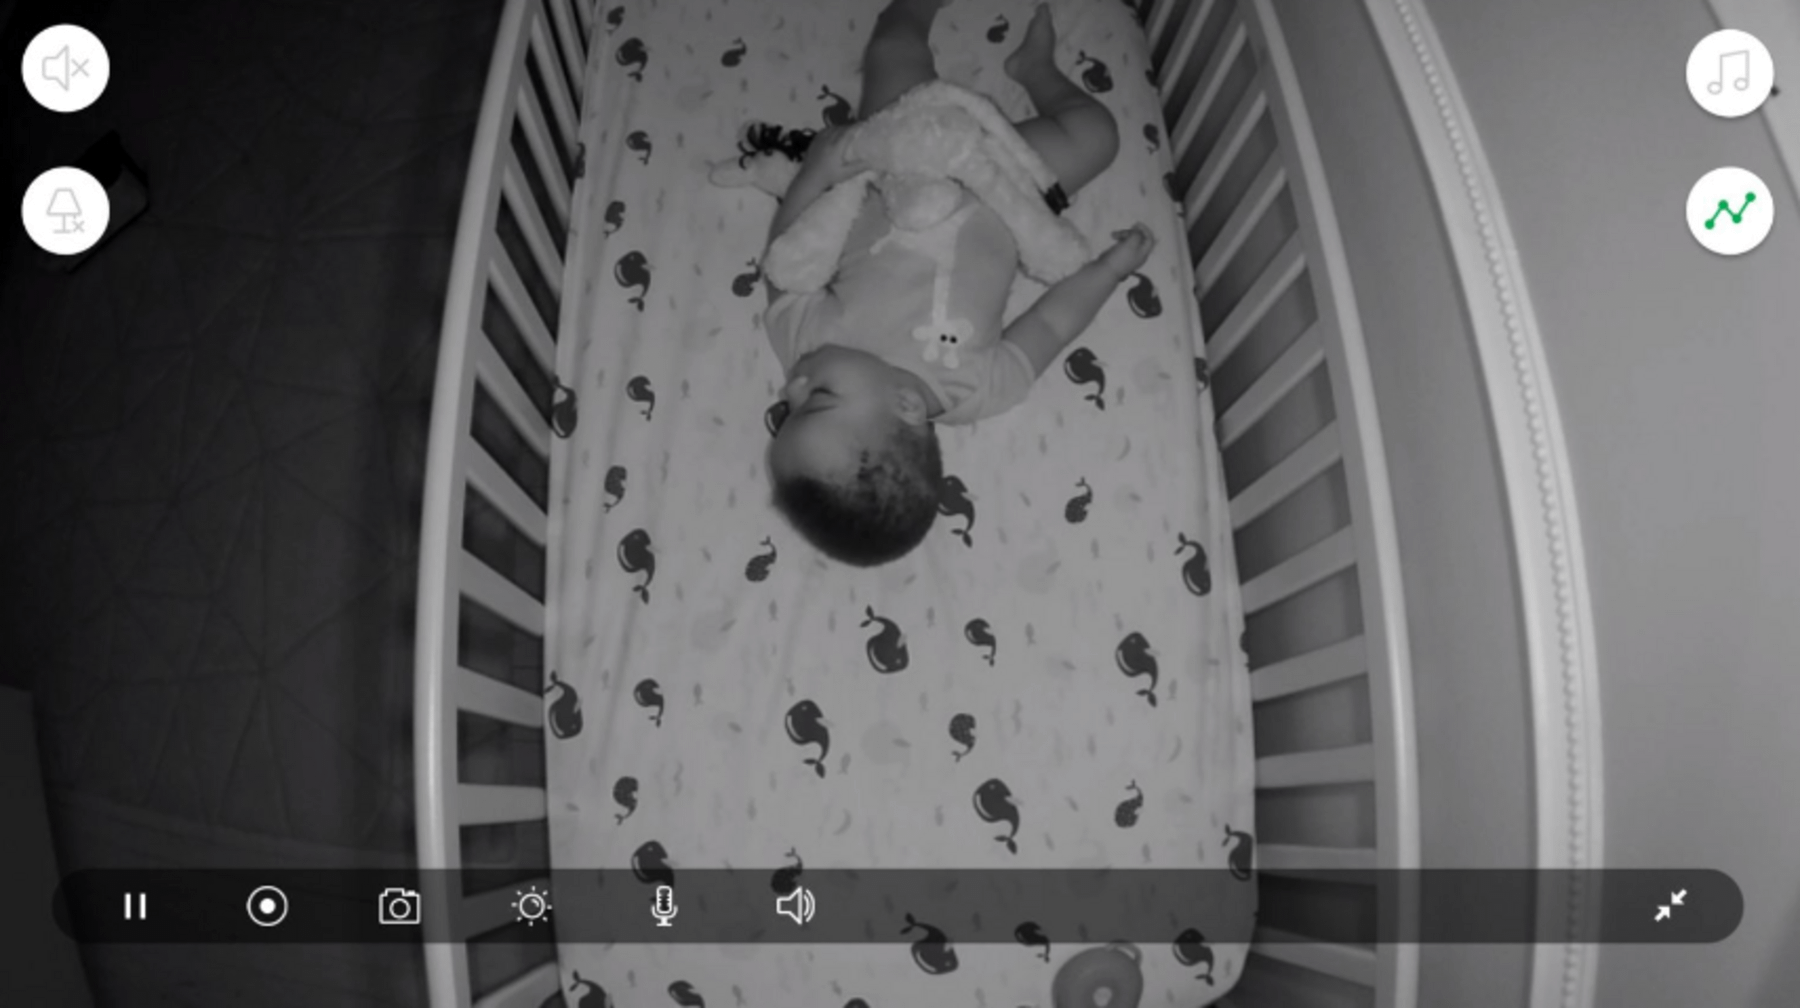 Night vision camera shows a baby in the crib